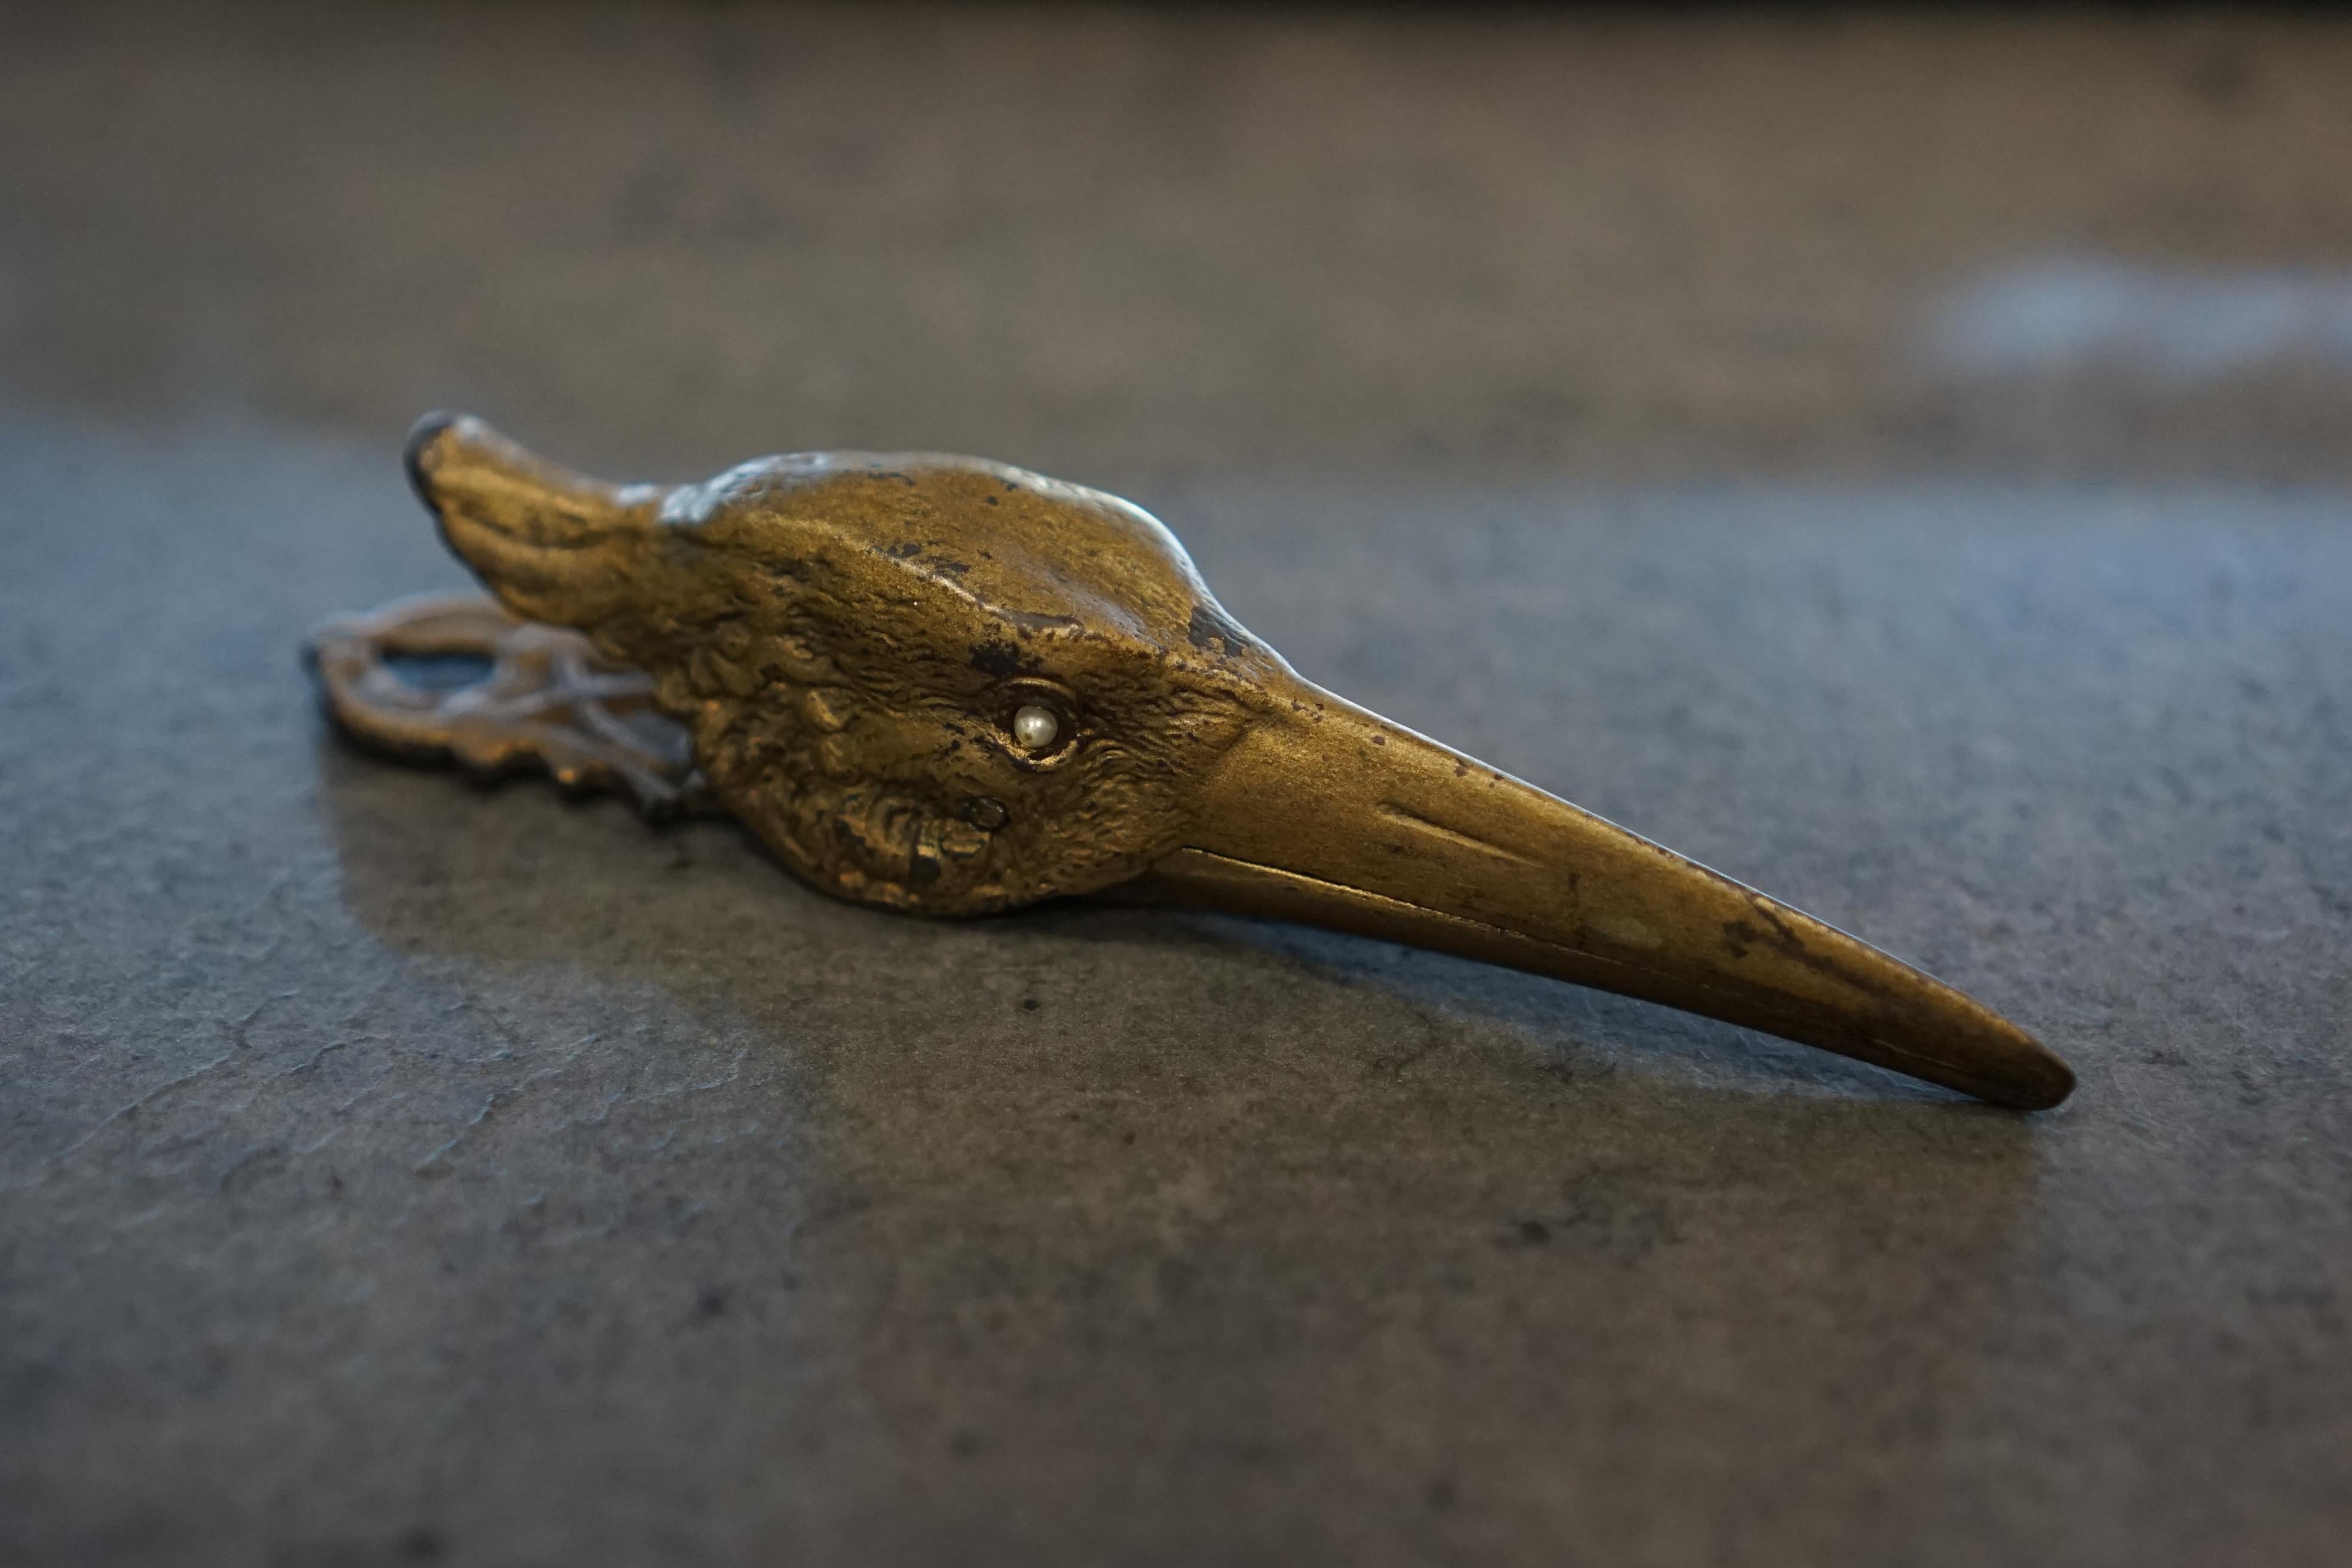 This exquisite cast bronze sprung hinged letter/document clip from France circa 1880 is a stunning example of functional artistry. Crafted in the form of a crane's head, it embodies the grace and elegance of the avian inspiration. The clip's design